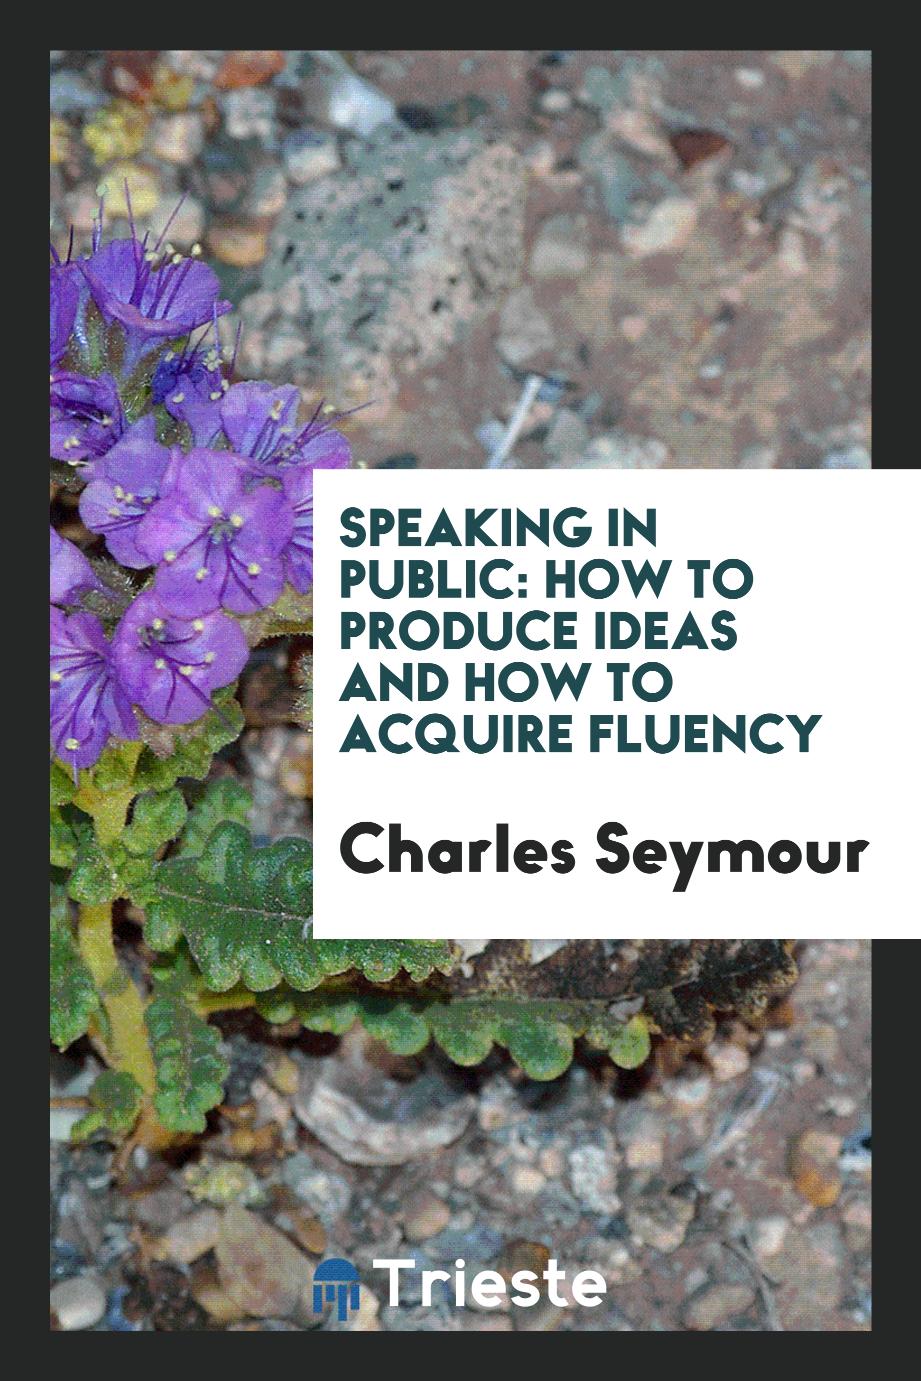 Speaking in public: how to produce ideas and how to acquire fluency